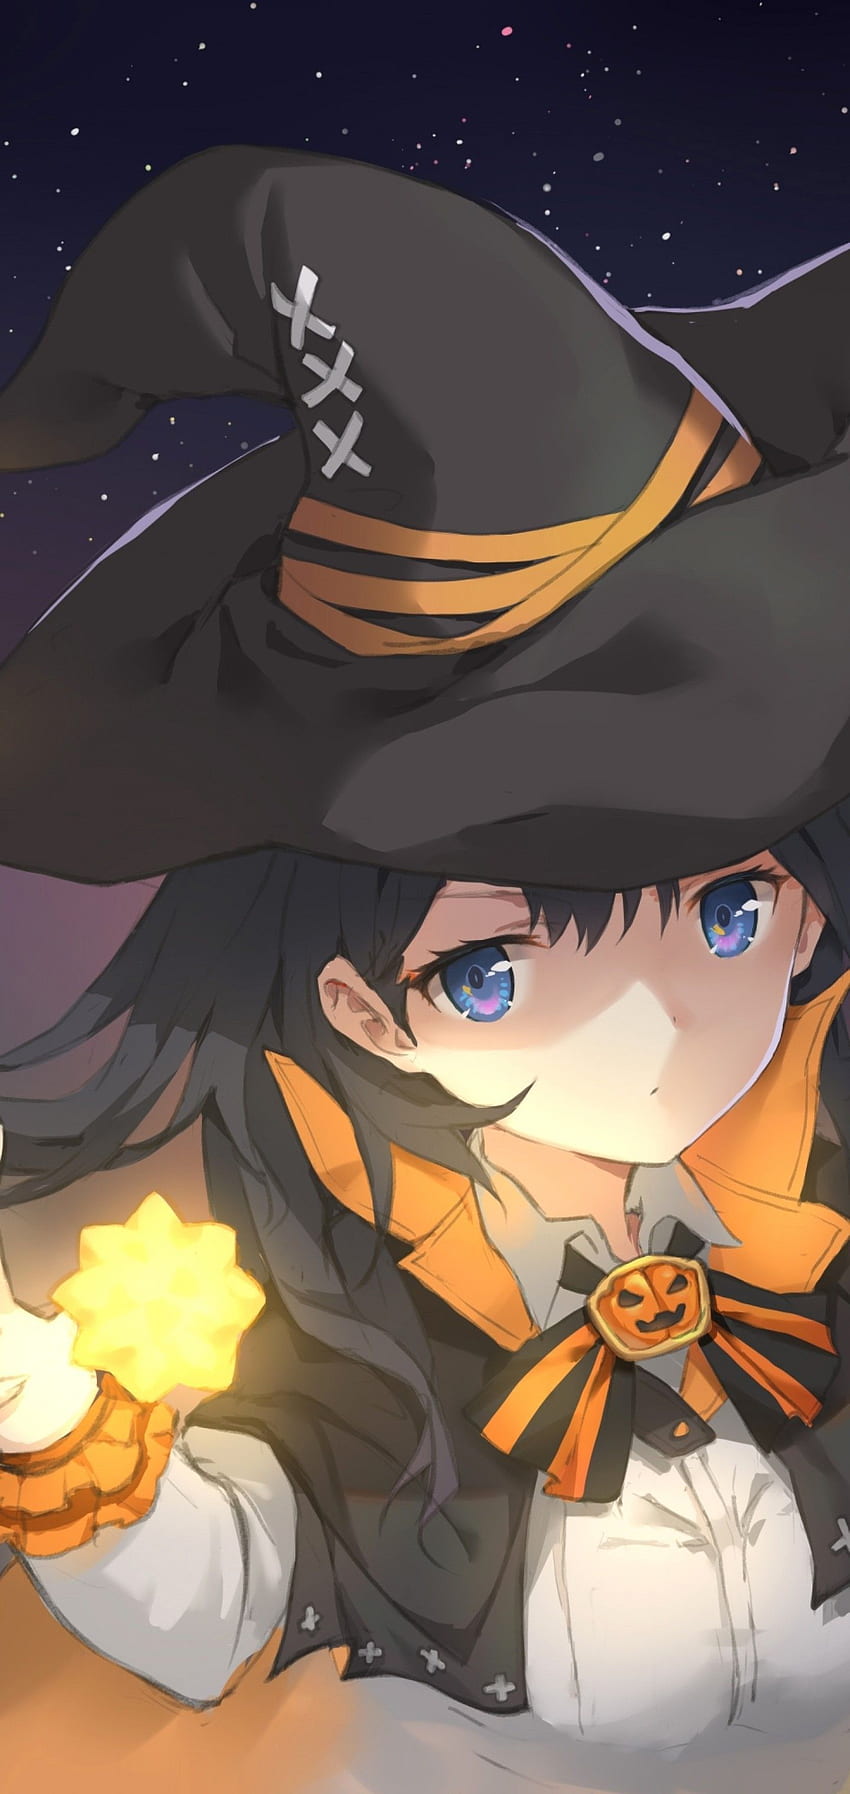 Anime Witch Girl, Halloween, Cape, Stars for Samsung Galaxy S10 Plus HD phone wallpaper